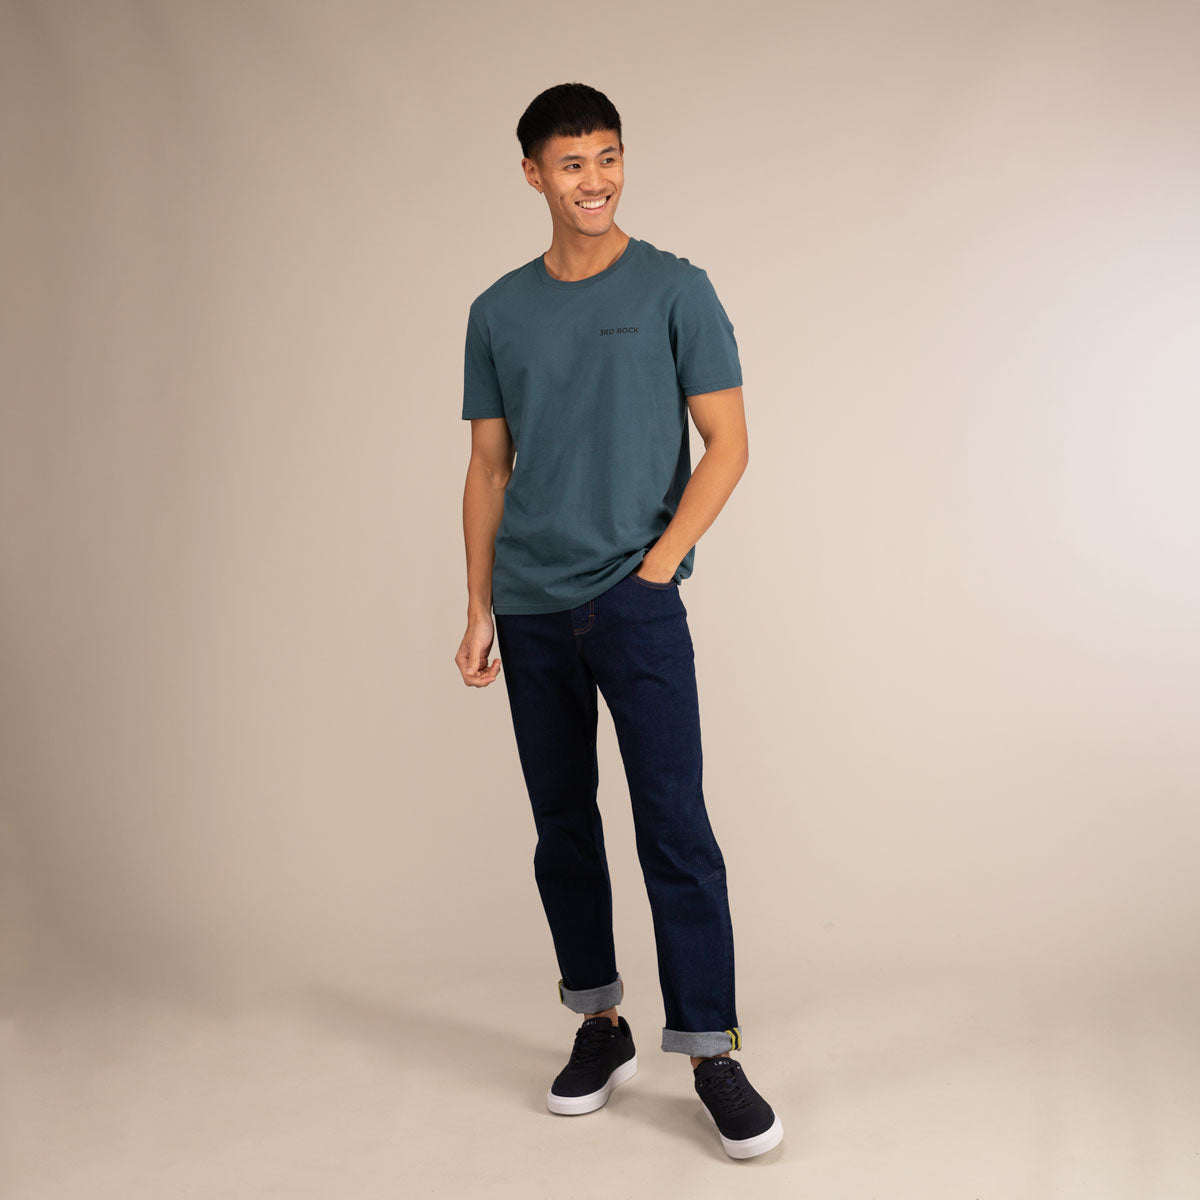 MARS JEANS | Organic Ultimate Movement Jeans | 3RD ROCK Clothing -  Donald is 6ft 1 with a 29" waist, 36" hips and wears a 30/LL, but can also wear a 28" waist for a slimmer fit.  M